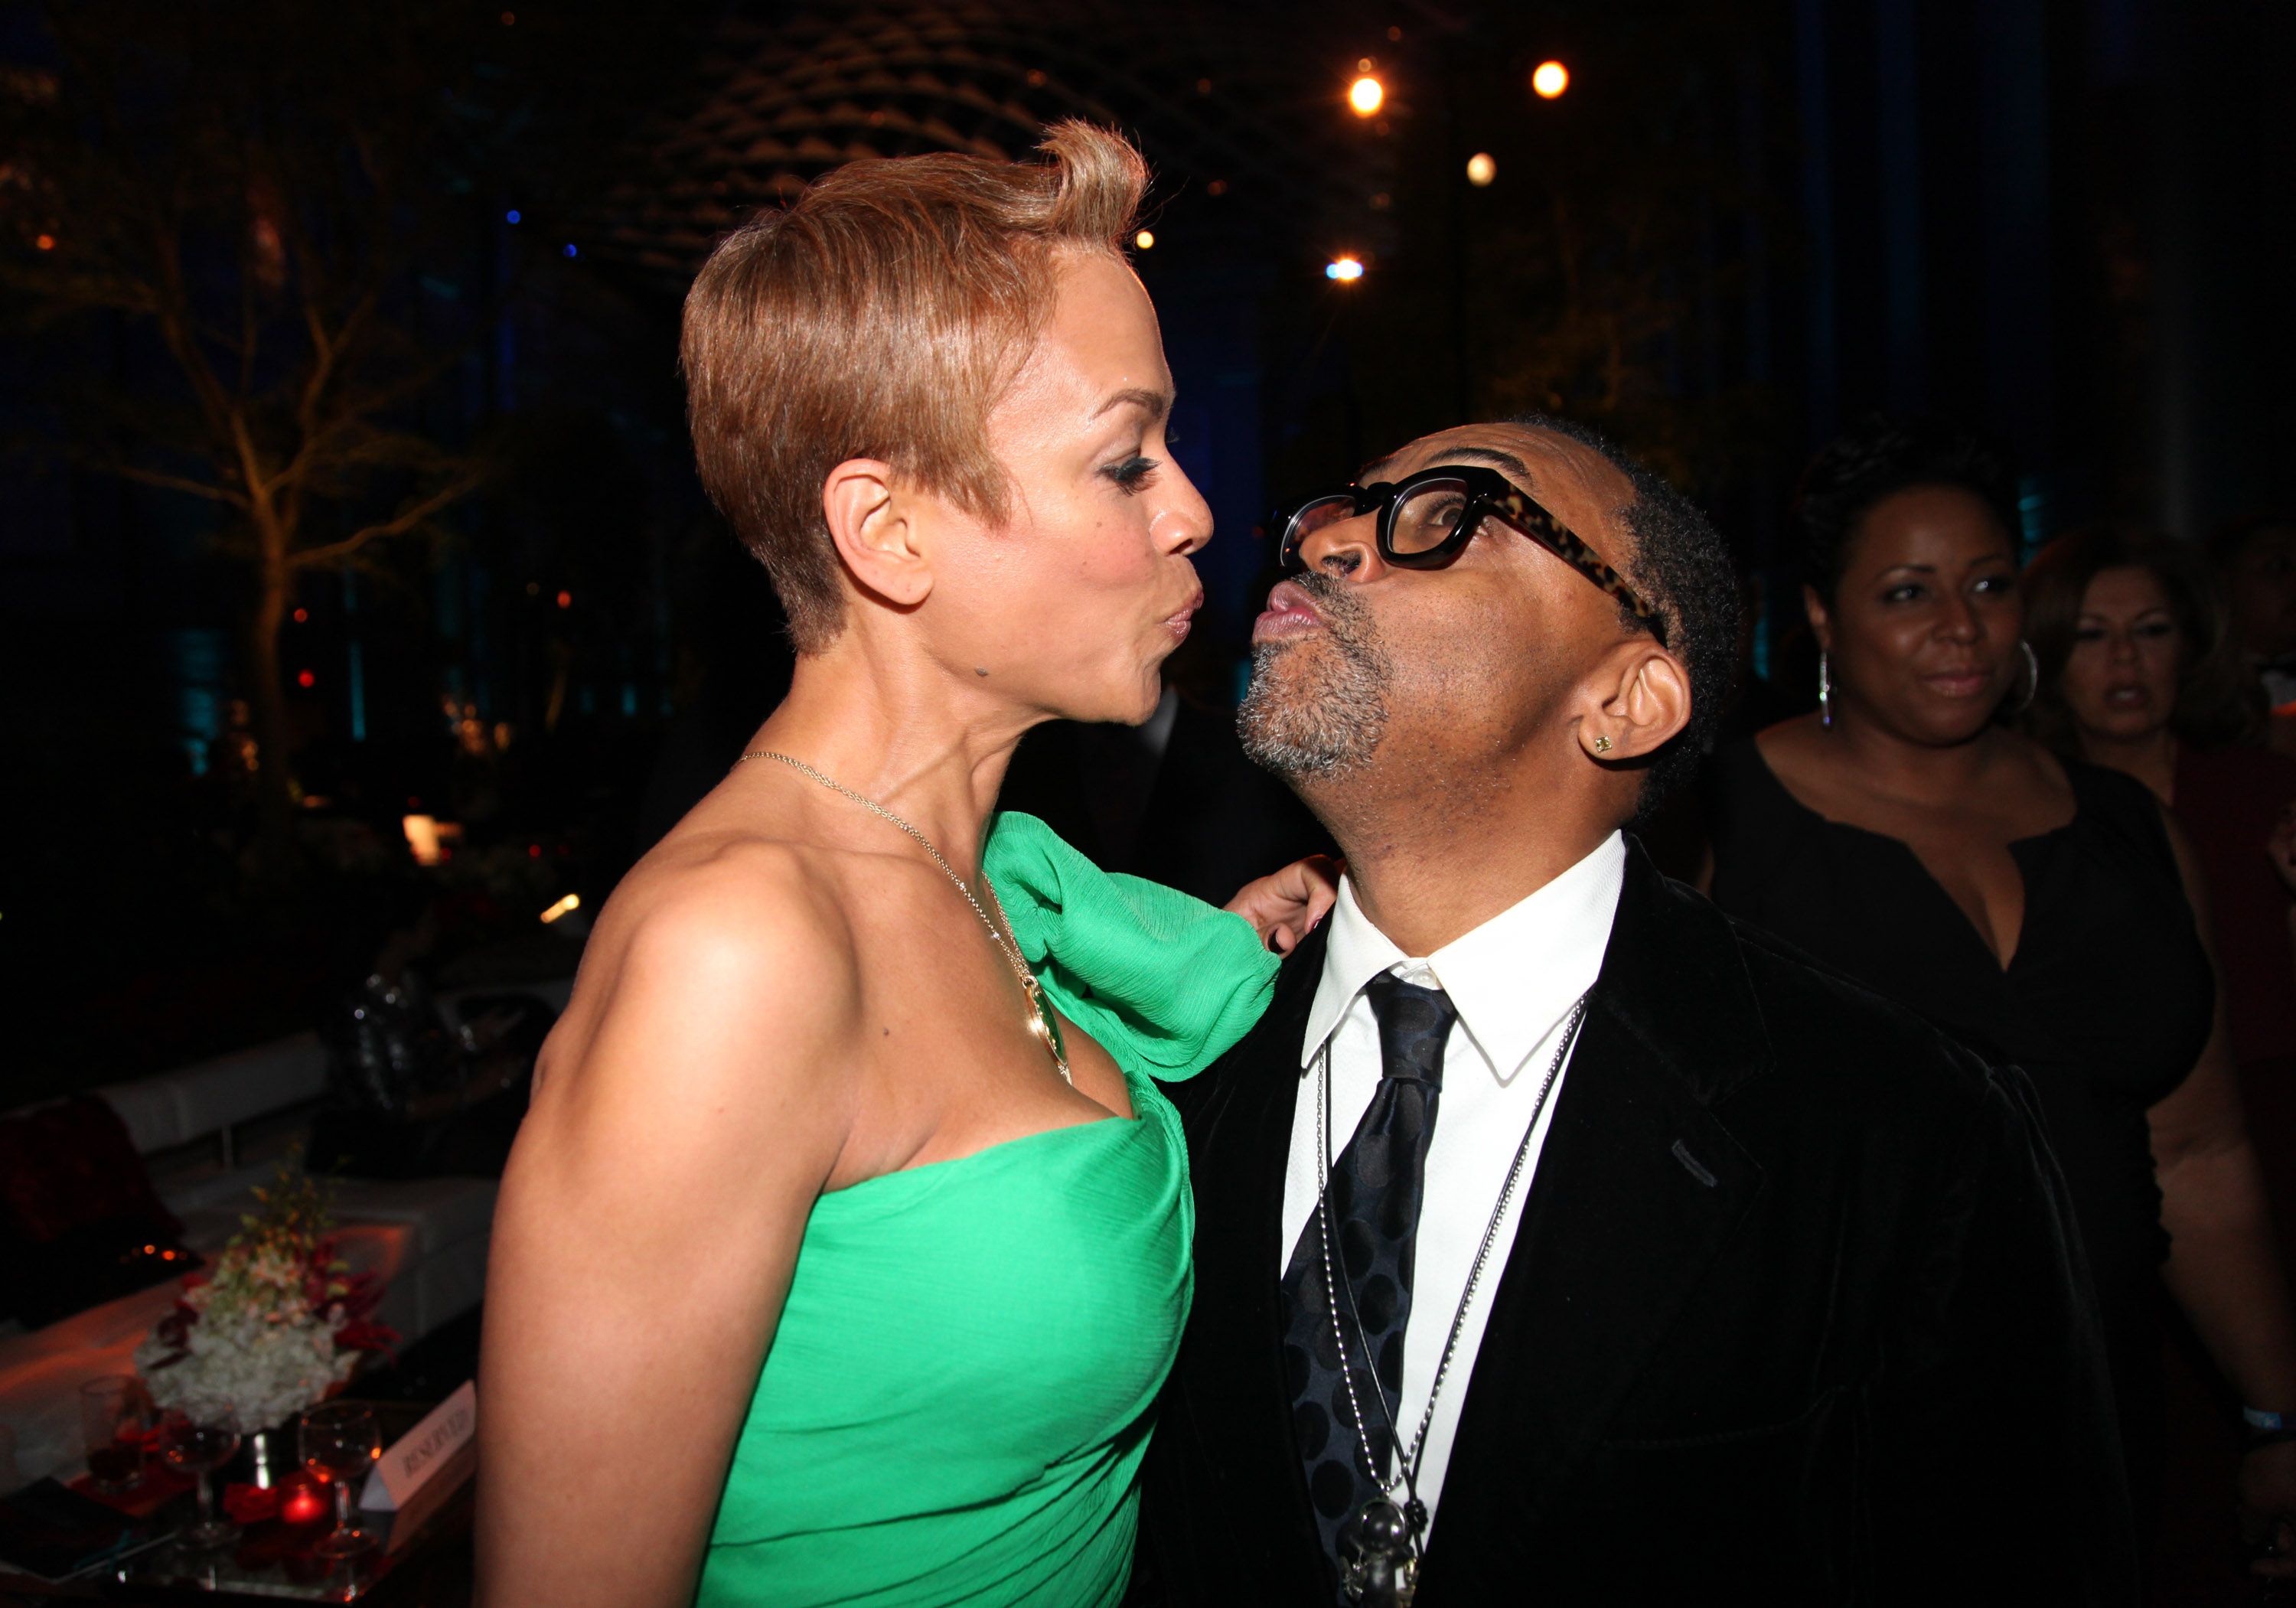 Tonya Lewis Lee and Spike Lee at the after party for BET Honors 2012 in Washington, DC | Source: Getty Images